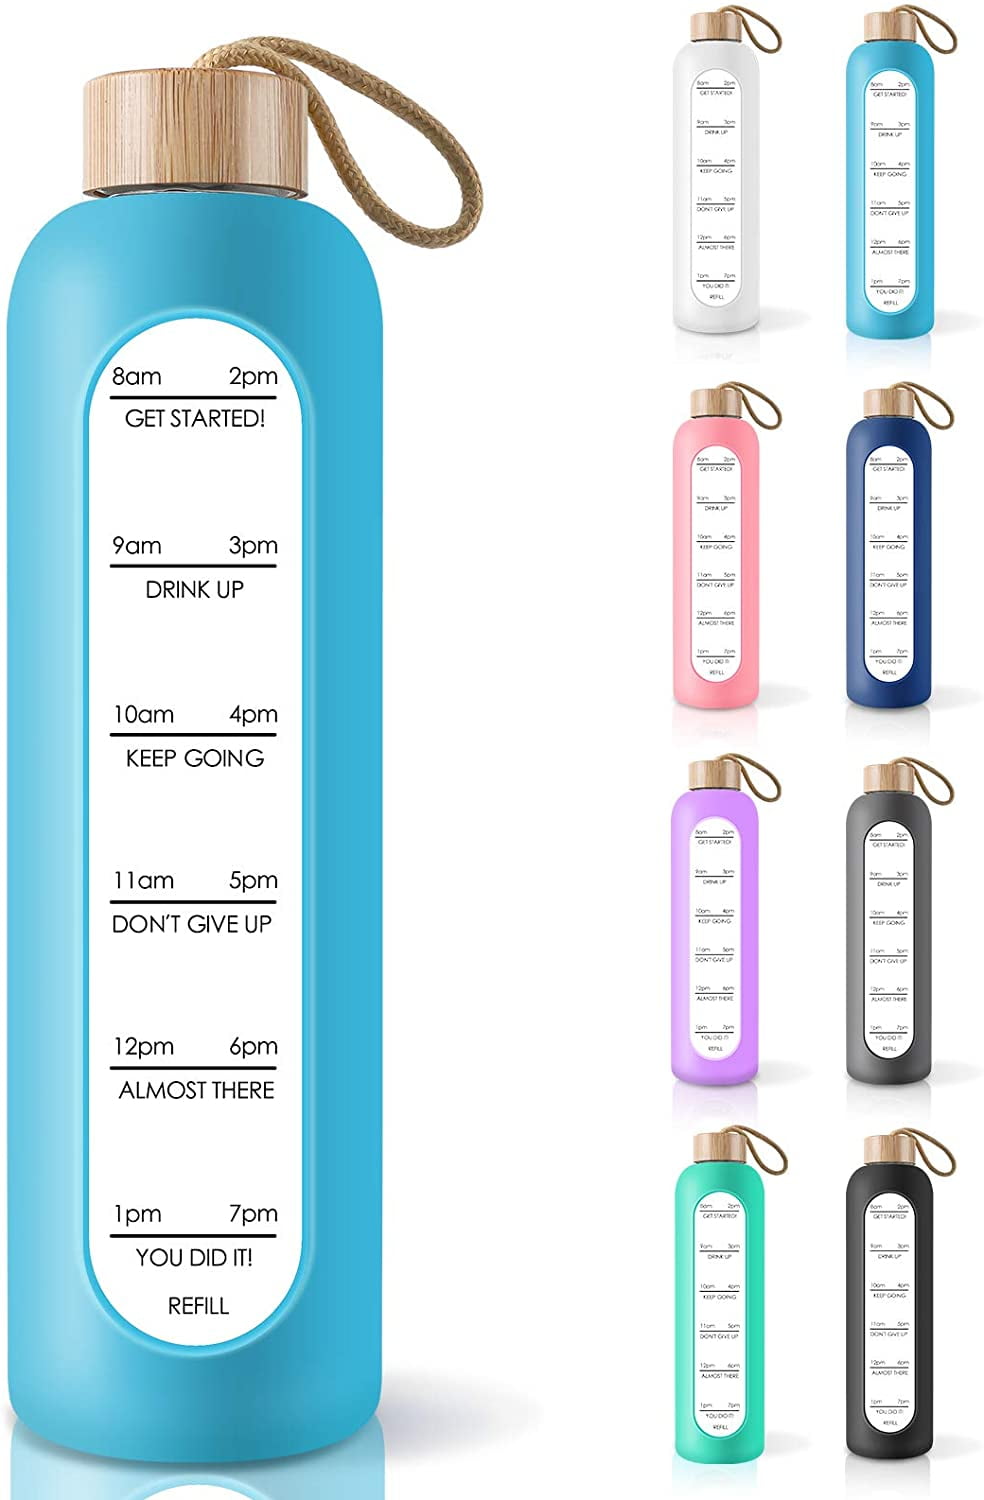 PROBTTL 32 Oz Borosilicate Glass Water Bottle with Time Marker Reminder Quotes Leak Proof Reusable BPA Free Motivational Water Bottle with Silicone Sleeve and Bamboo Lid 